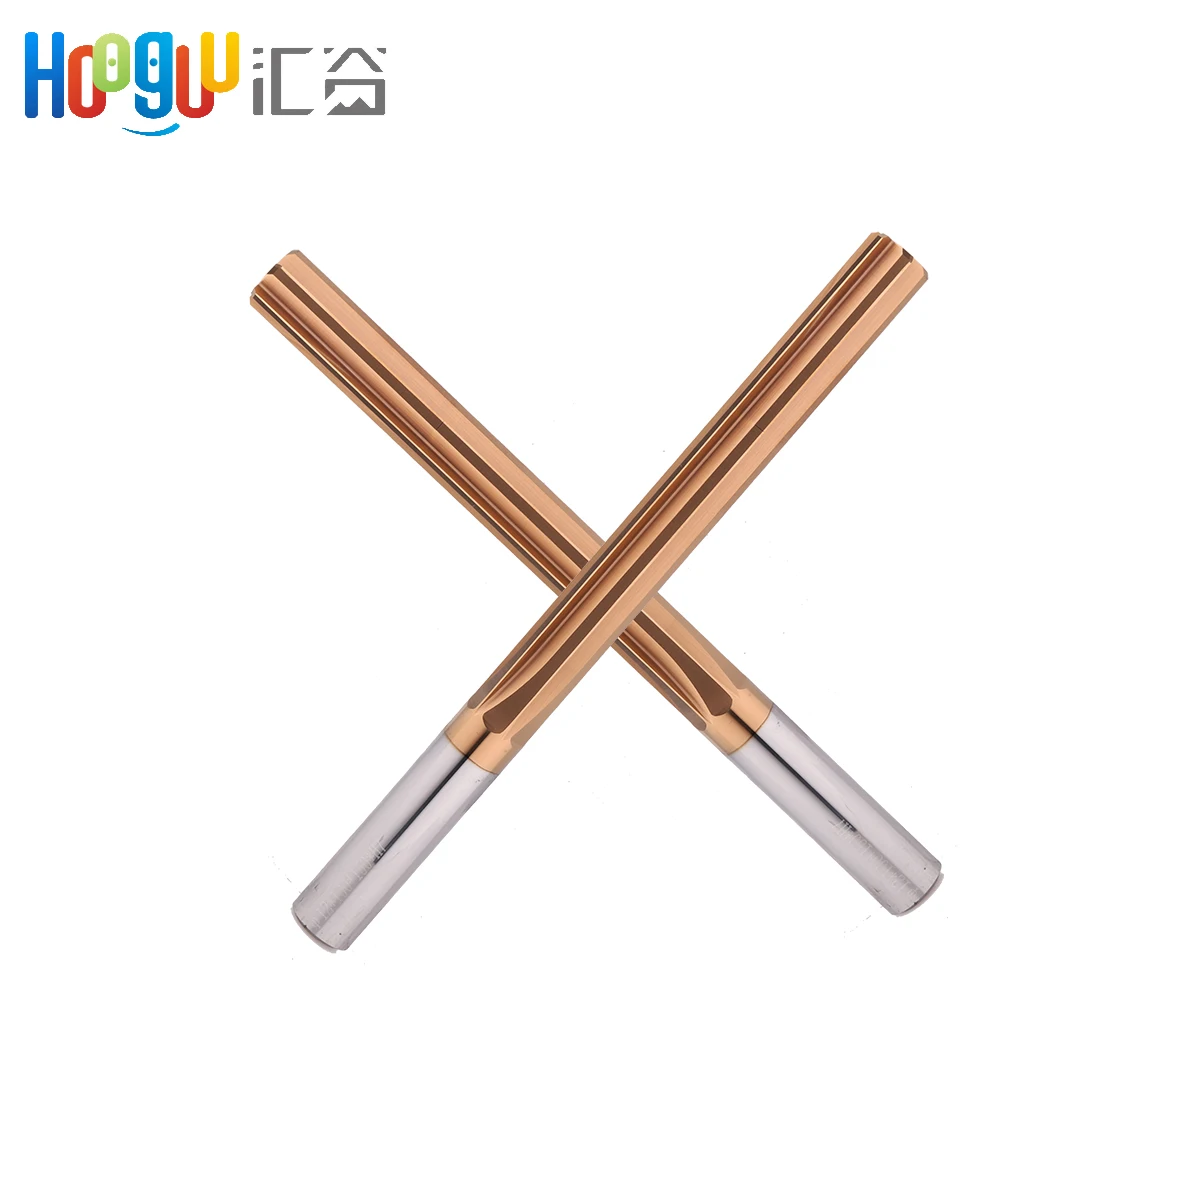 

Reamer HRC60 4Flutes 6 Flutes with 150mm Tungsten steel straight groove Extended reamer H7 alloy with coating Reamers, Picture shown